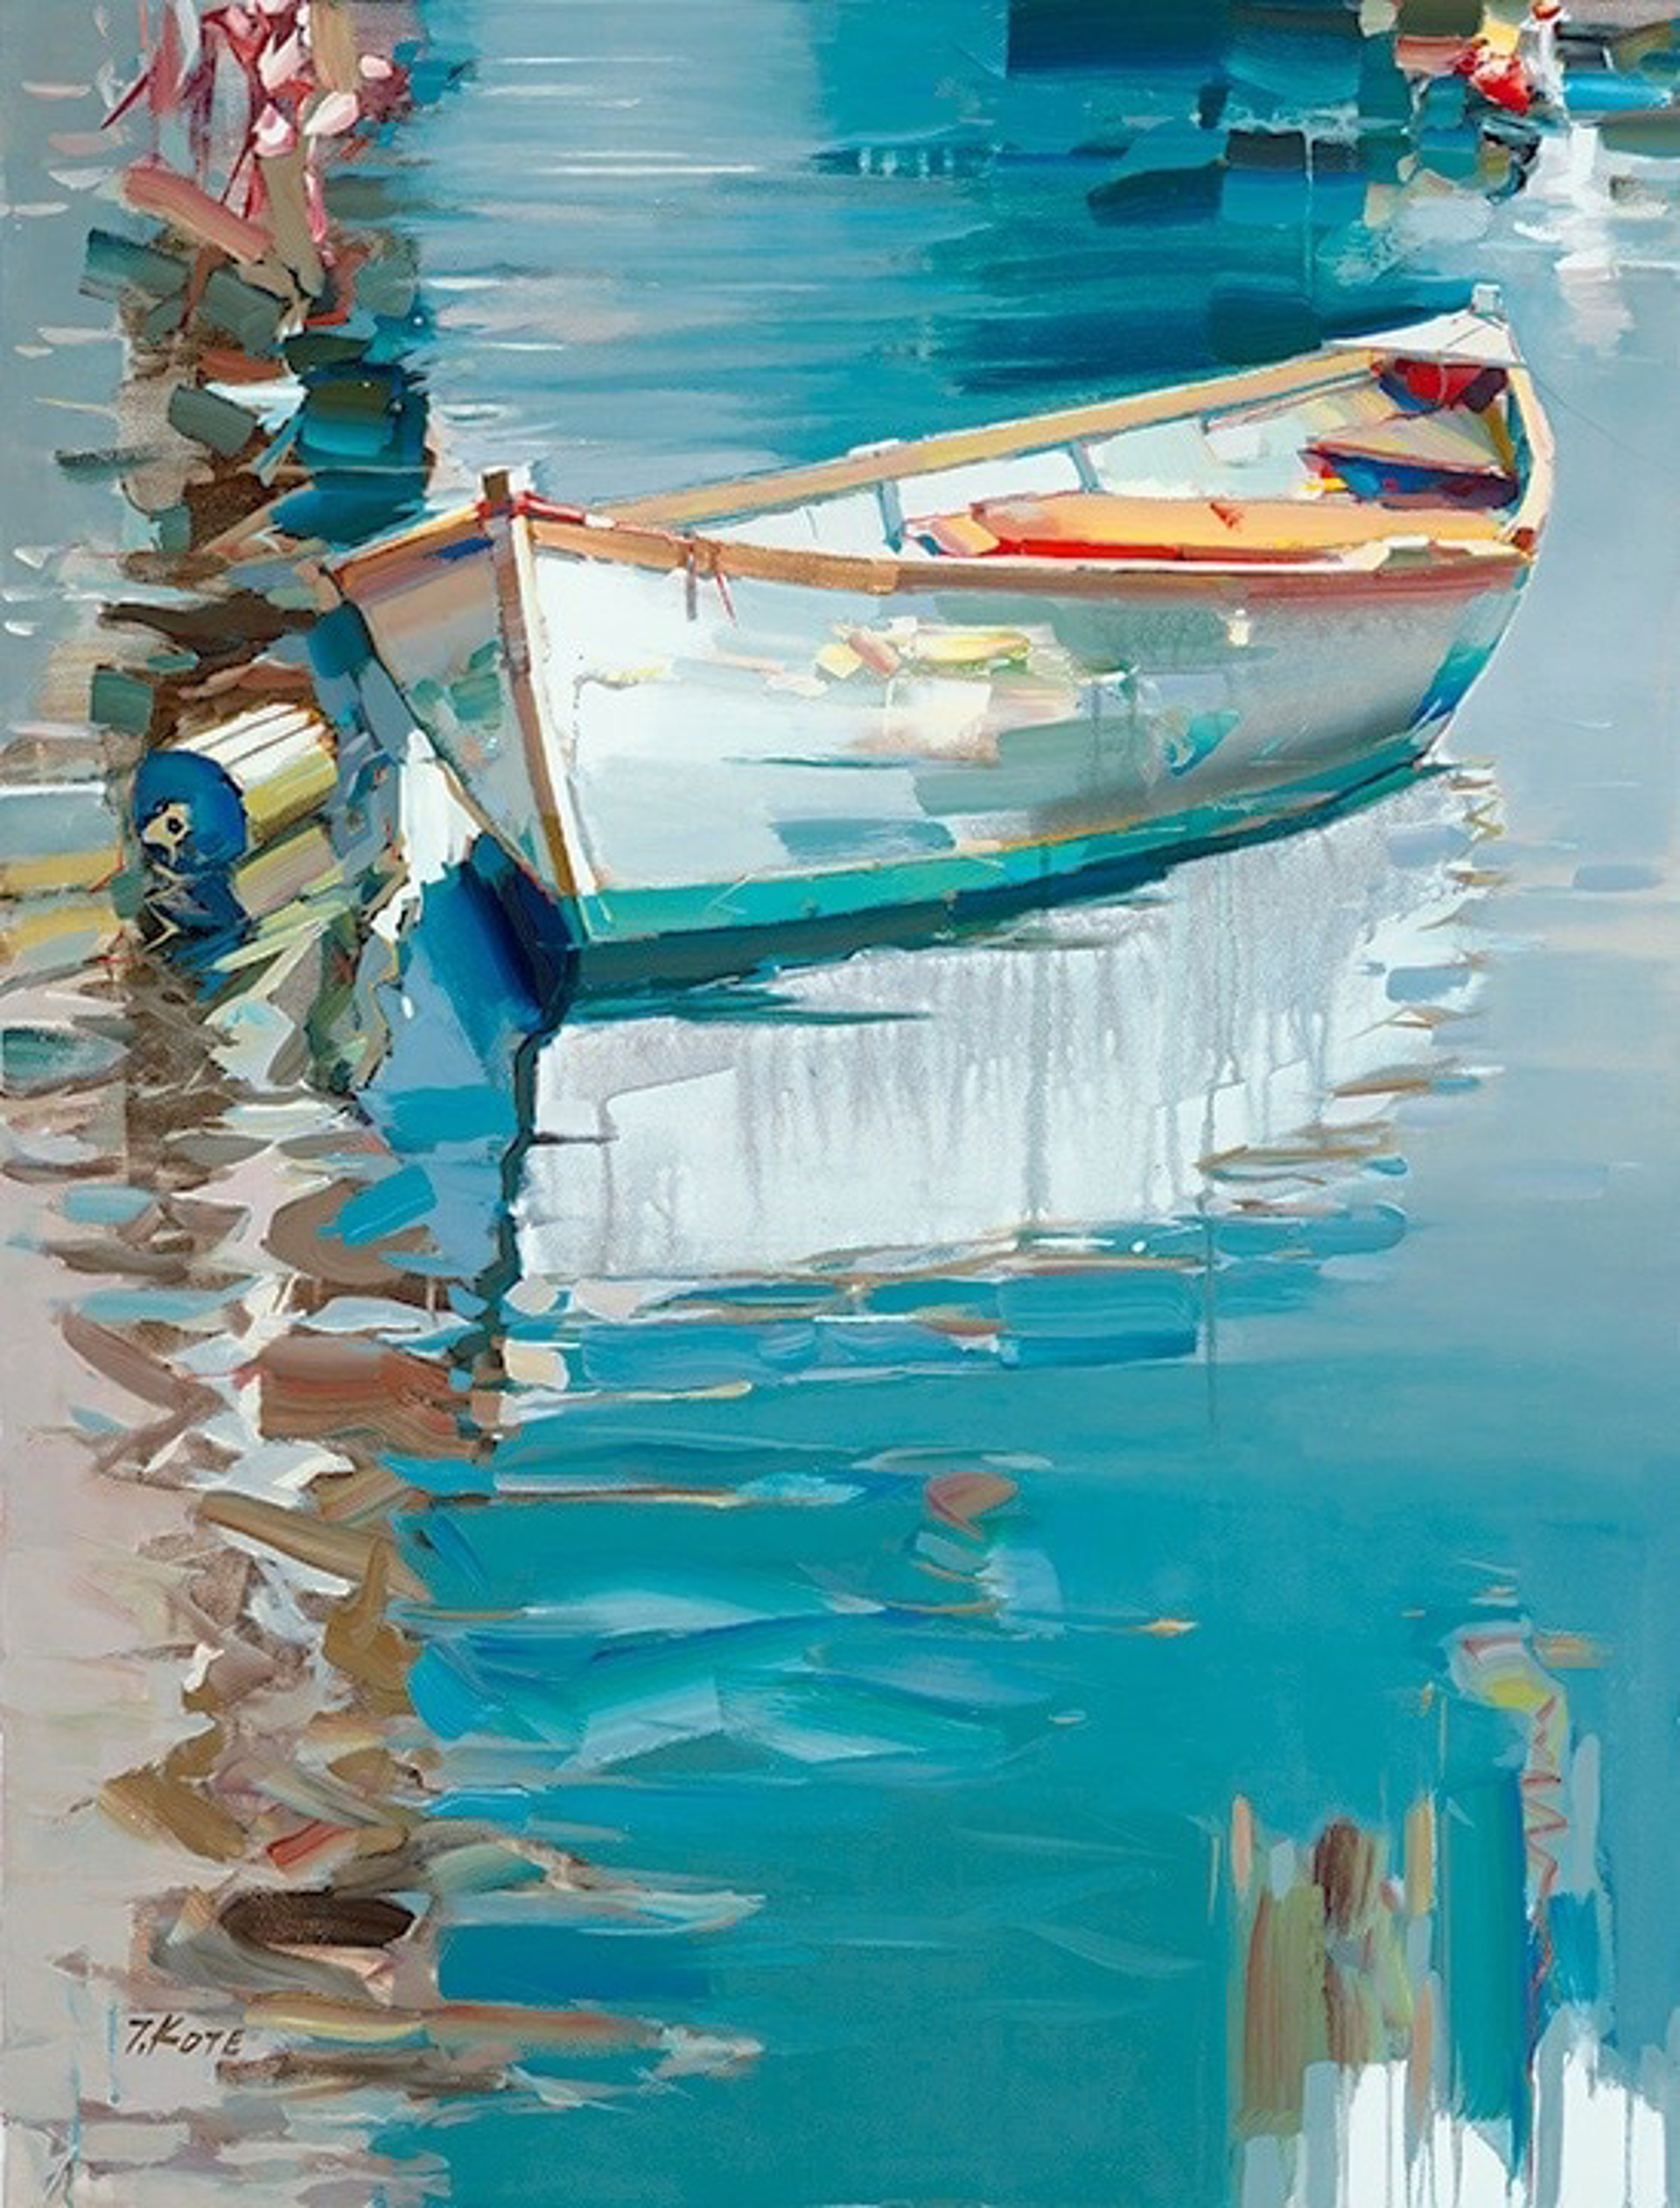 Looking for Summer by Josef Kote